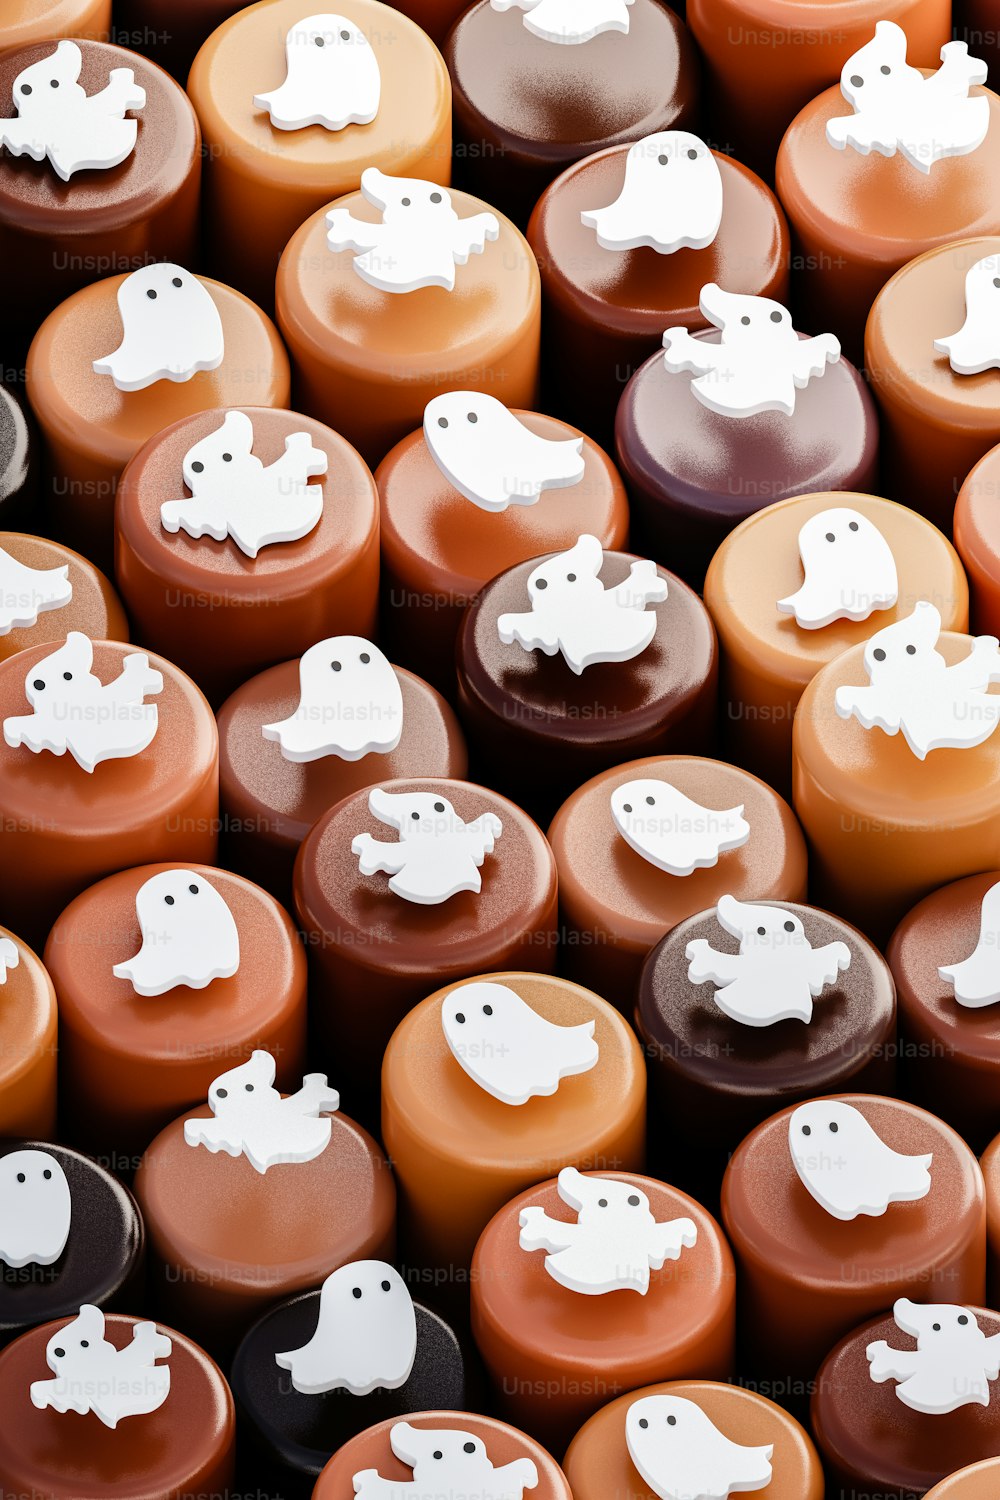 a pile of chocolates with white ghost decorations on them